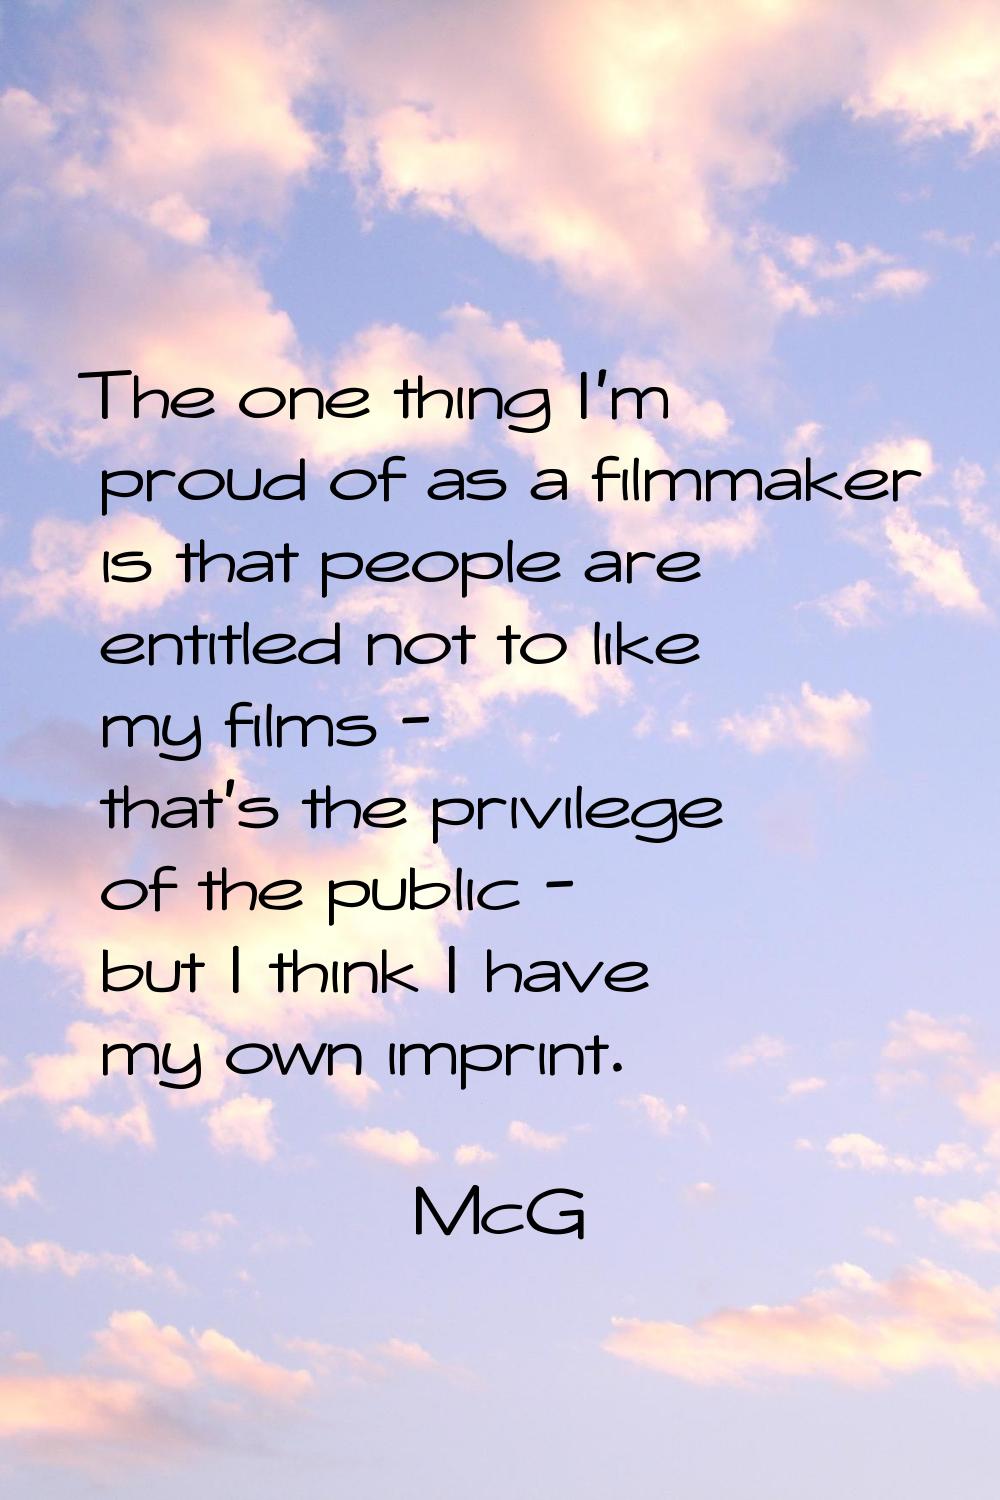 The one thing I'm proud of as a filmmaker is that people are entitled not to like my films - that's